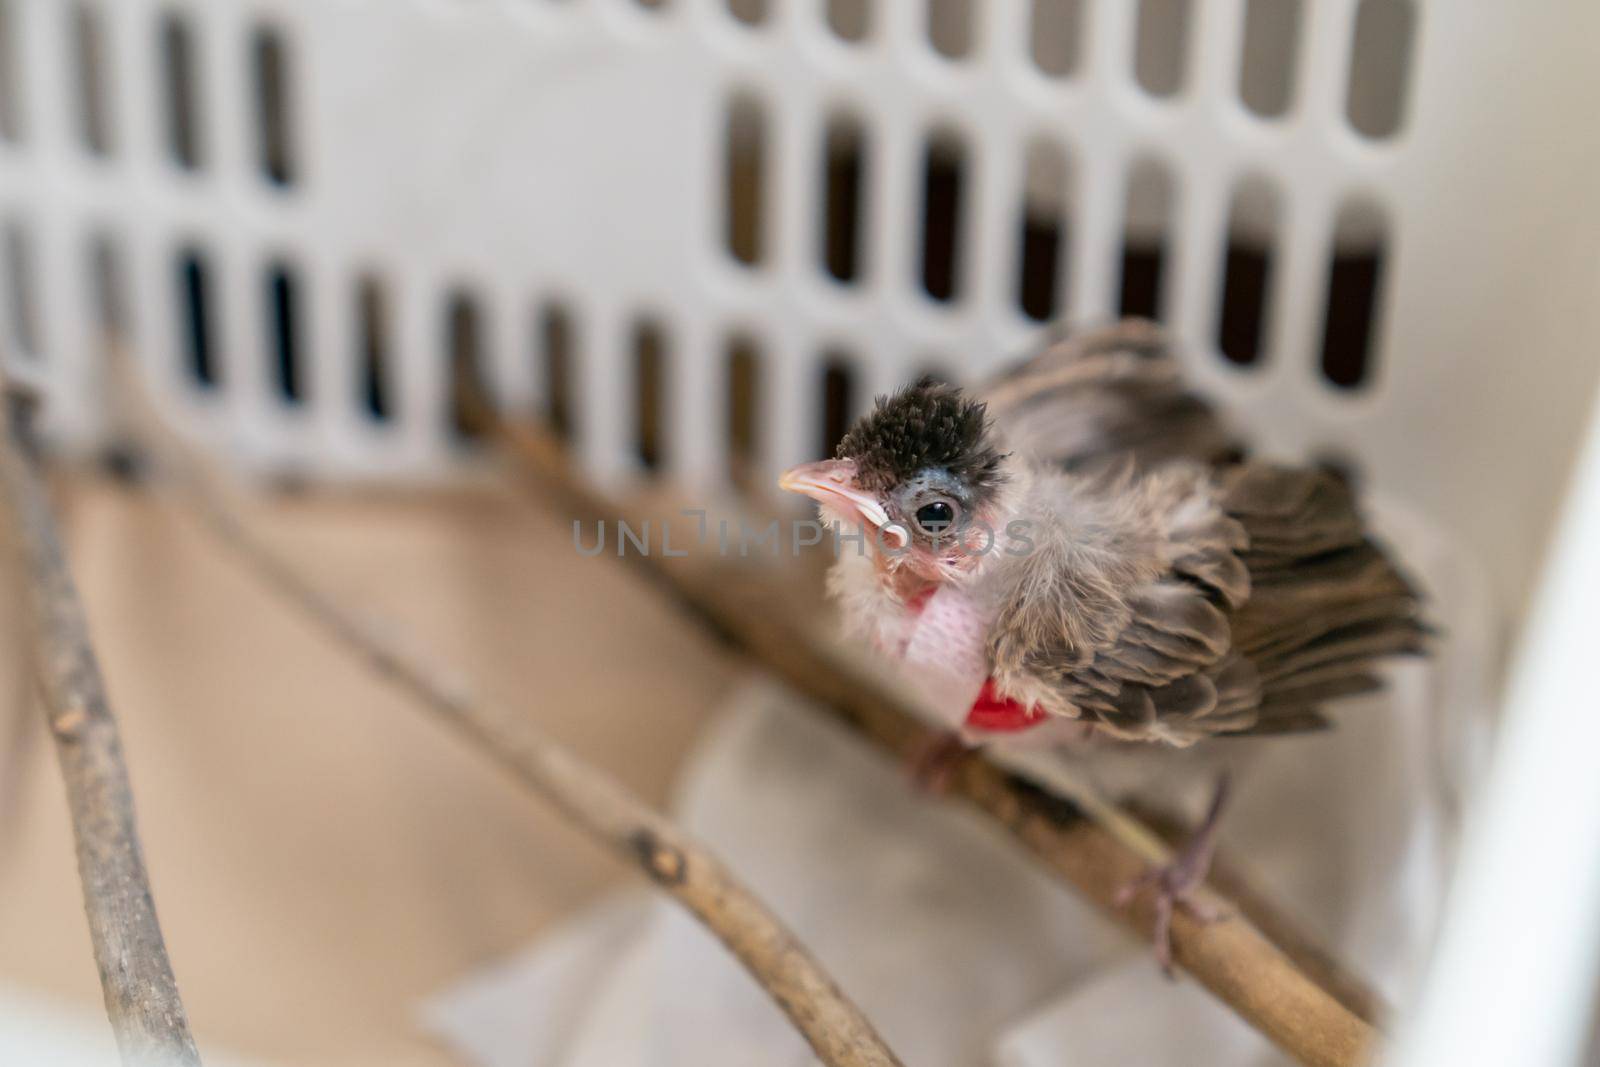 Treatment of Air Sac Rupture in Birds, baby Red-whiskered bulbul injury after attack by cat. by sirawit99